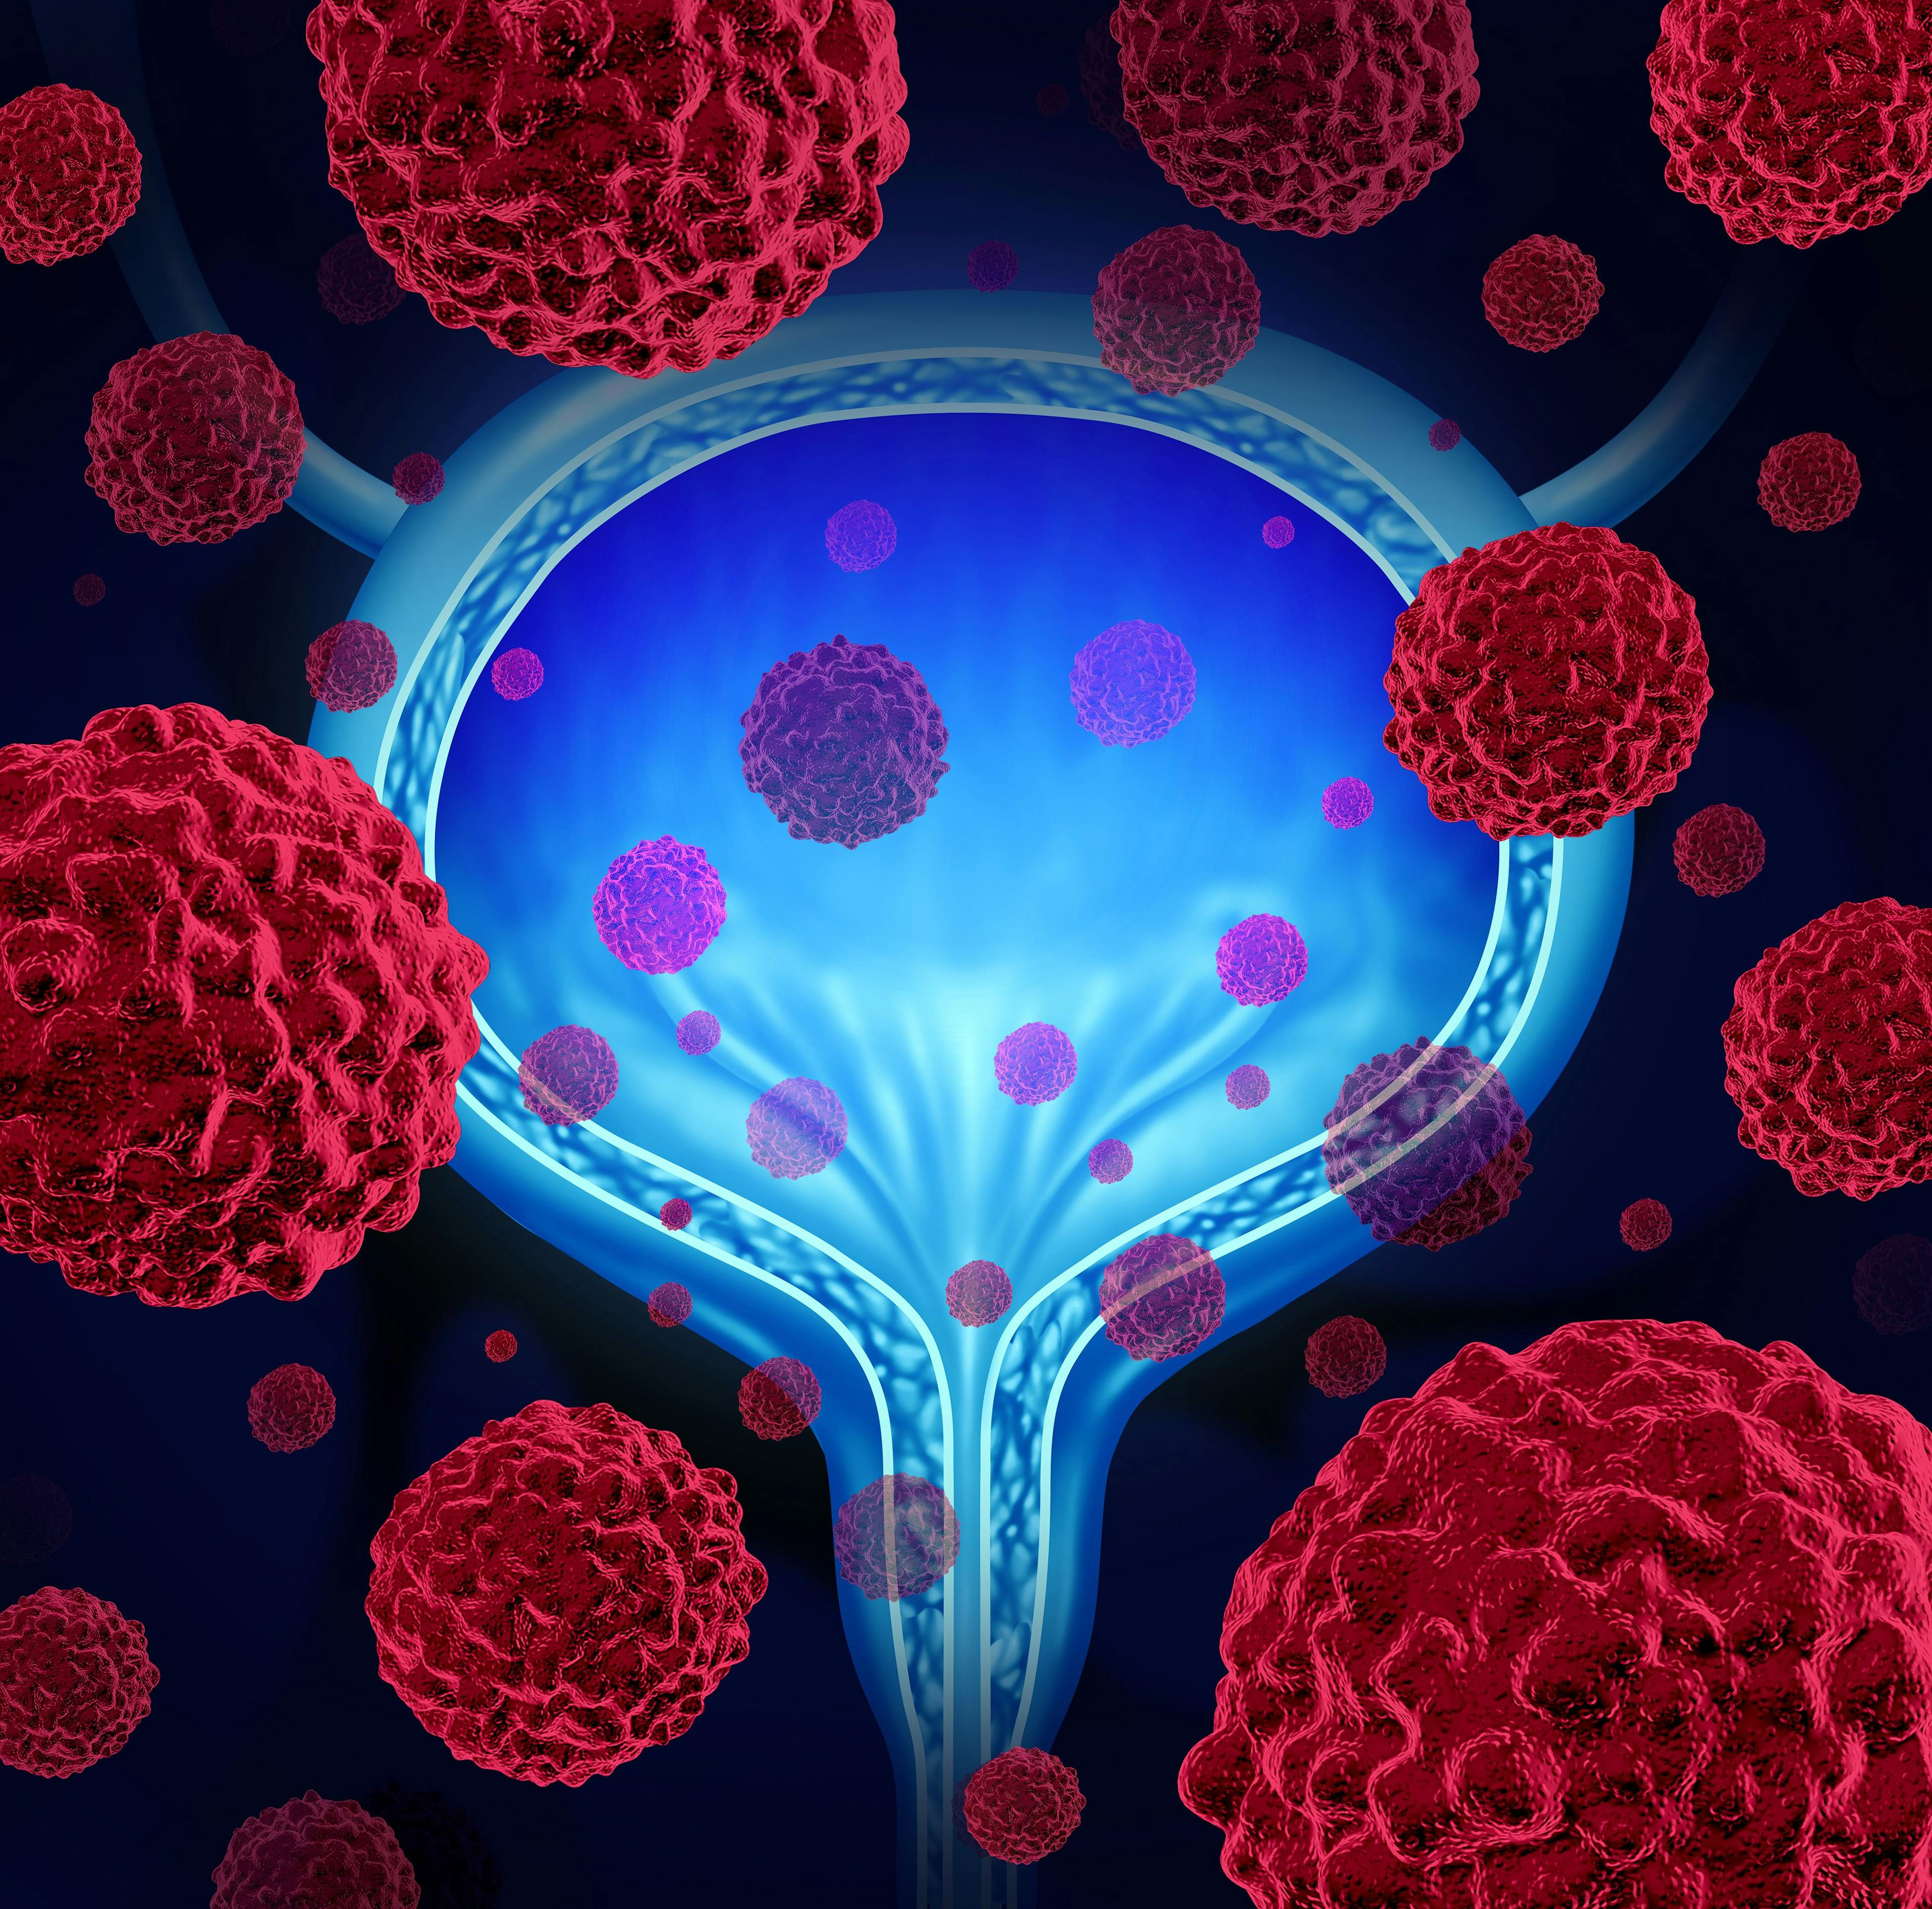 Atezolizumab Indication in US Withdrawn for Previously Treated Metastatic Urothelial Cancer